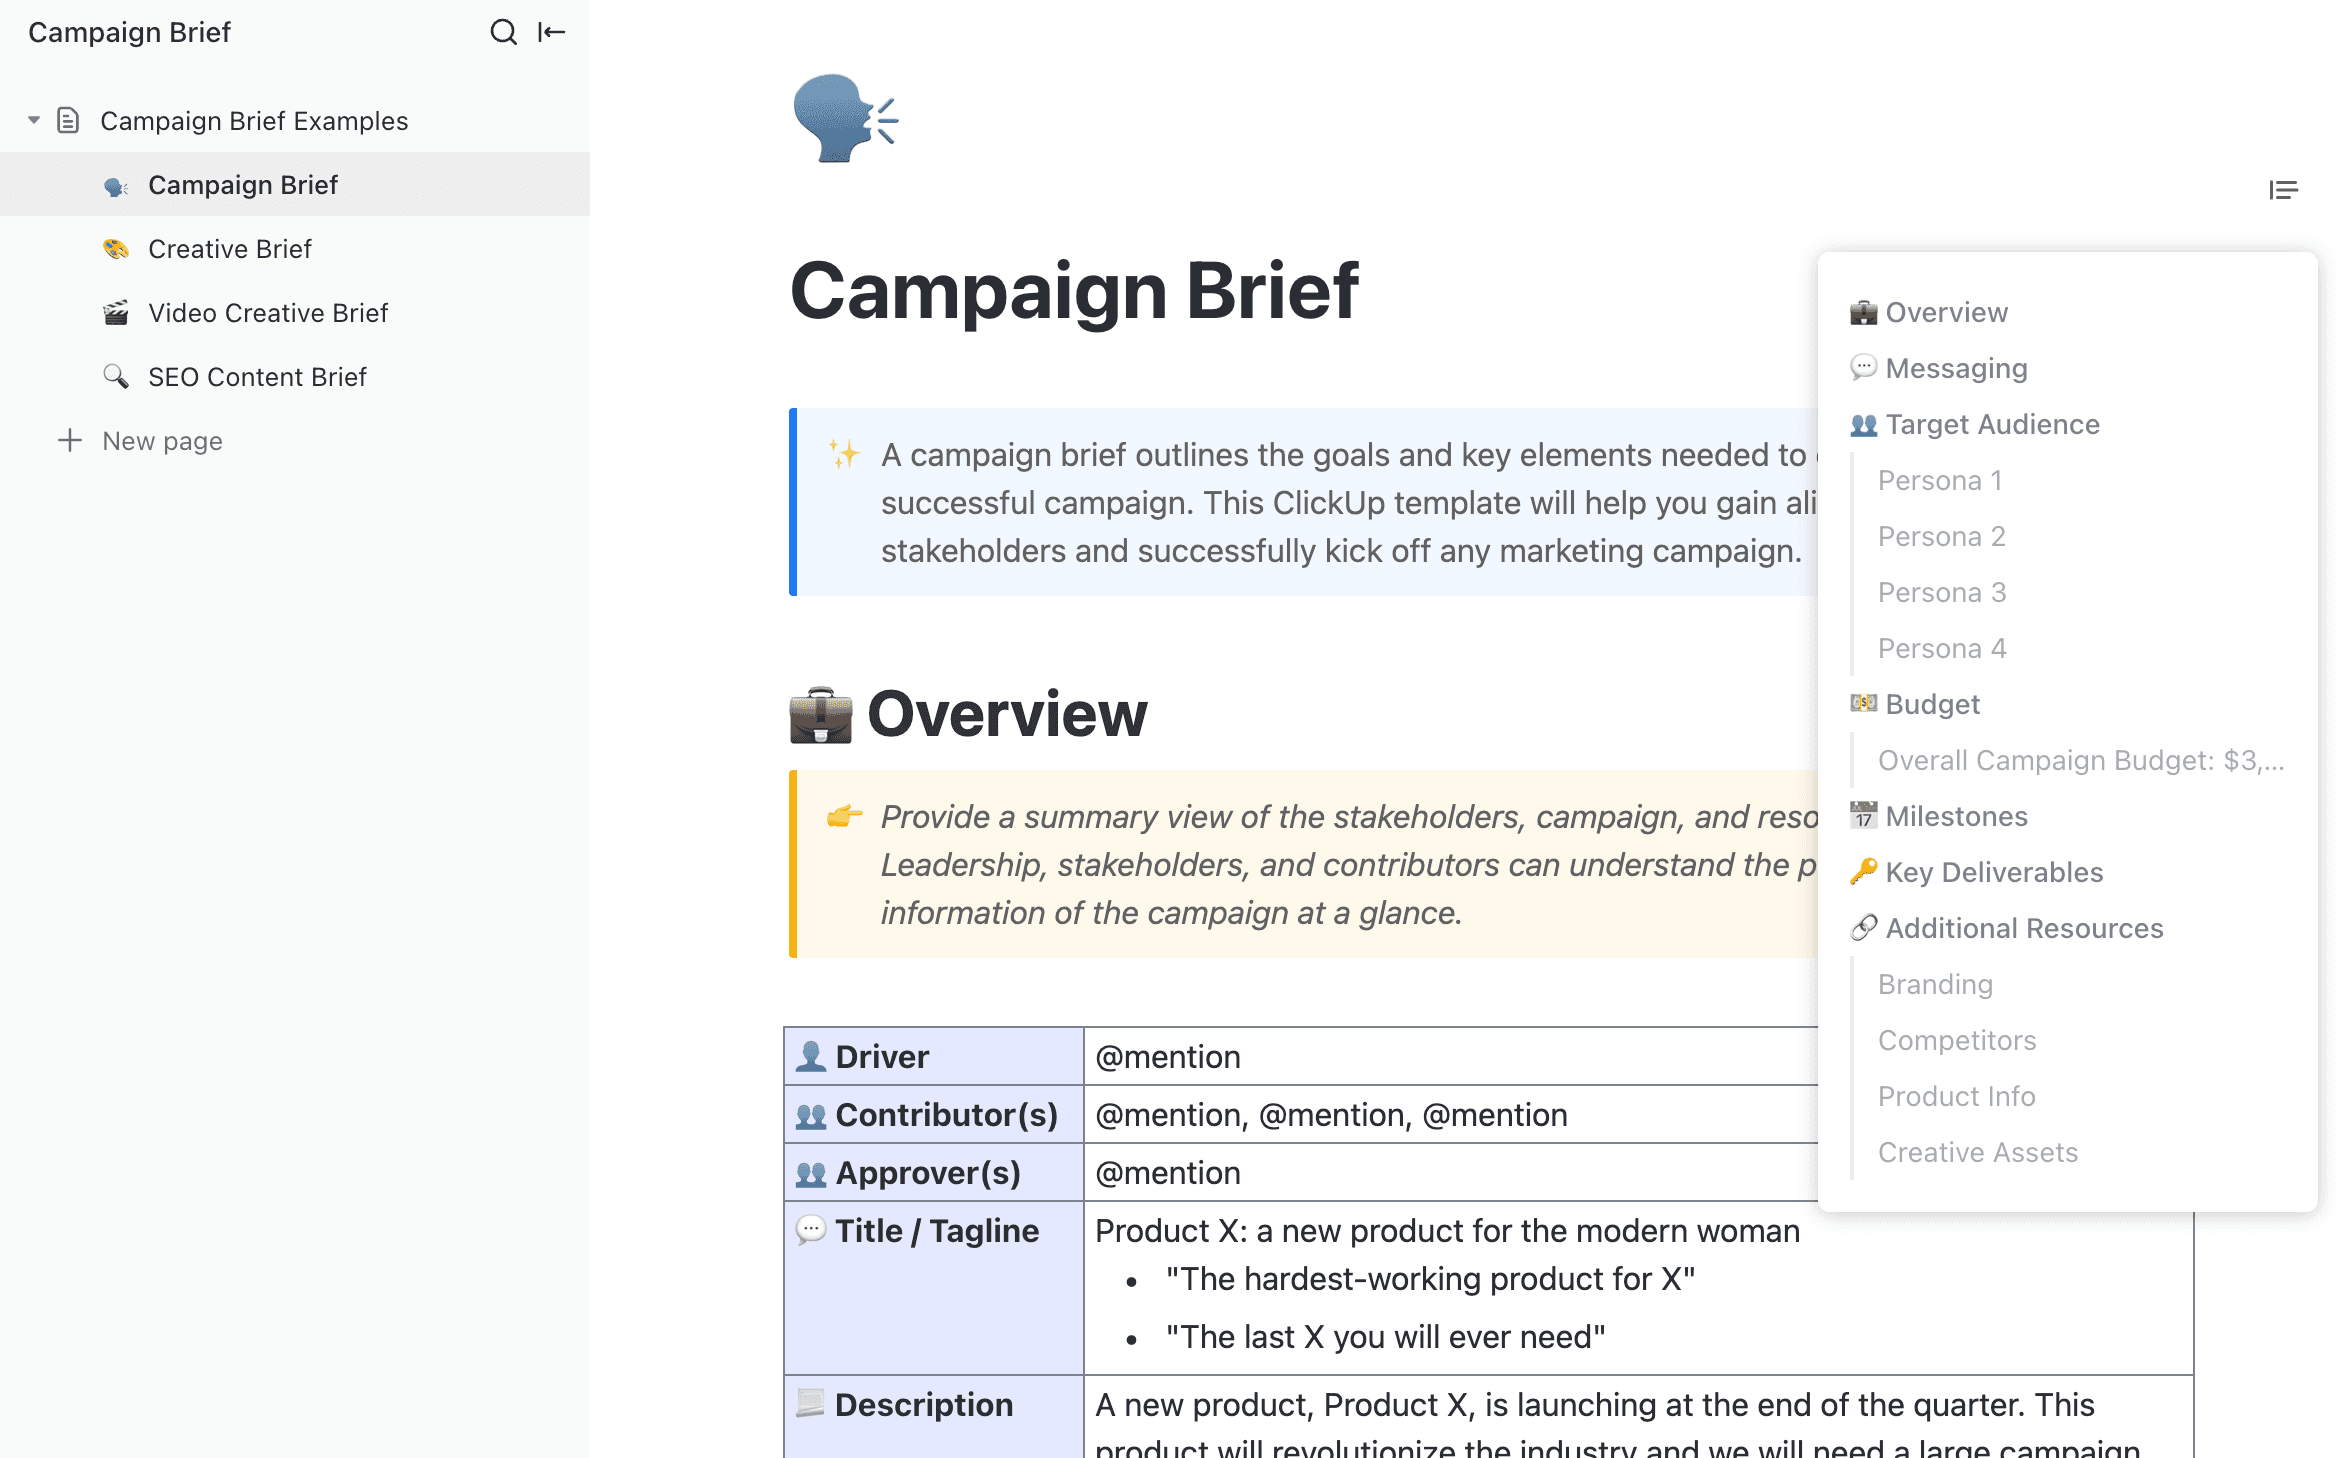 A campaign brief outlines the goals and key elements needed to create and launch a successful campaign. This ClickUp template will help you gain alignment across all stakeholders and successfully kick off any marketing campaign.